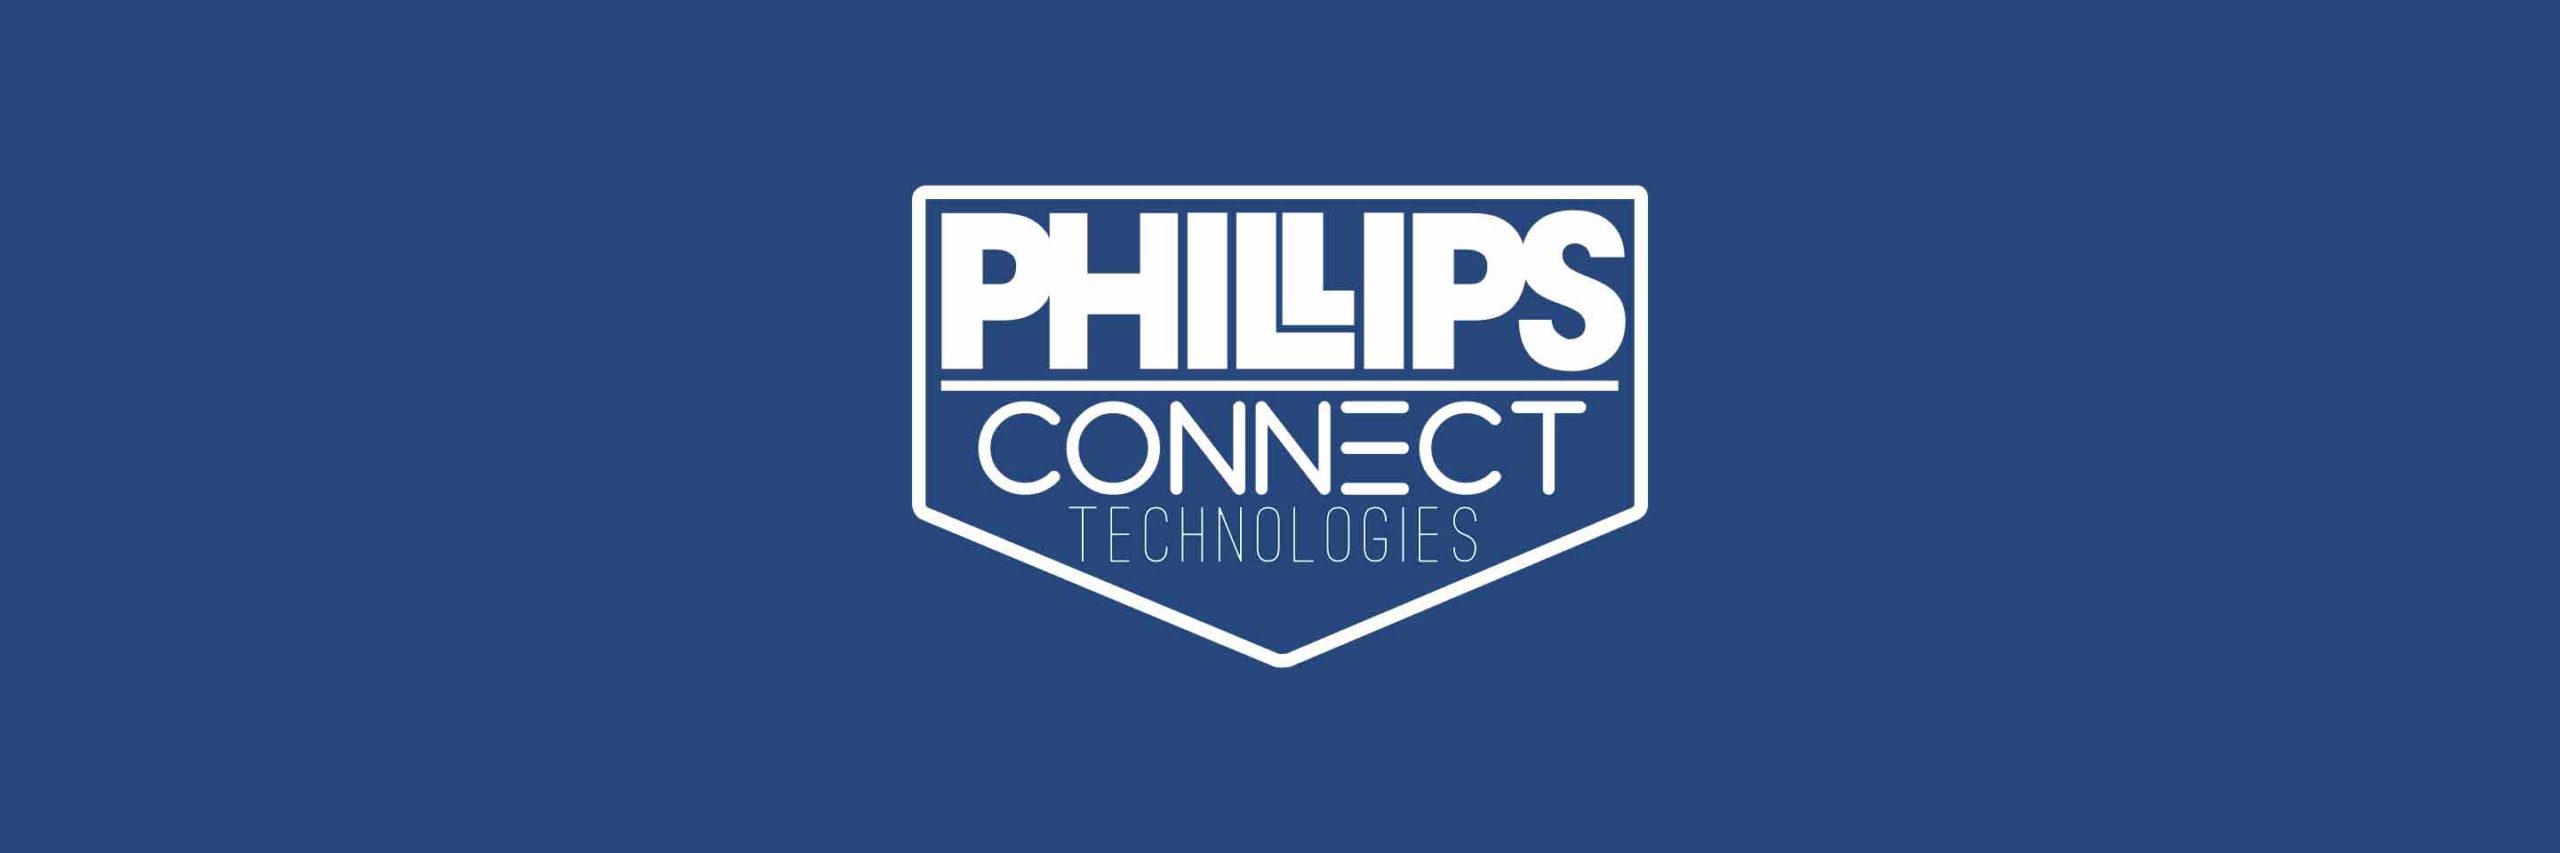 Phillips Industries' OEM facility recognized by DTNA